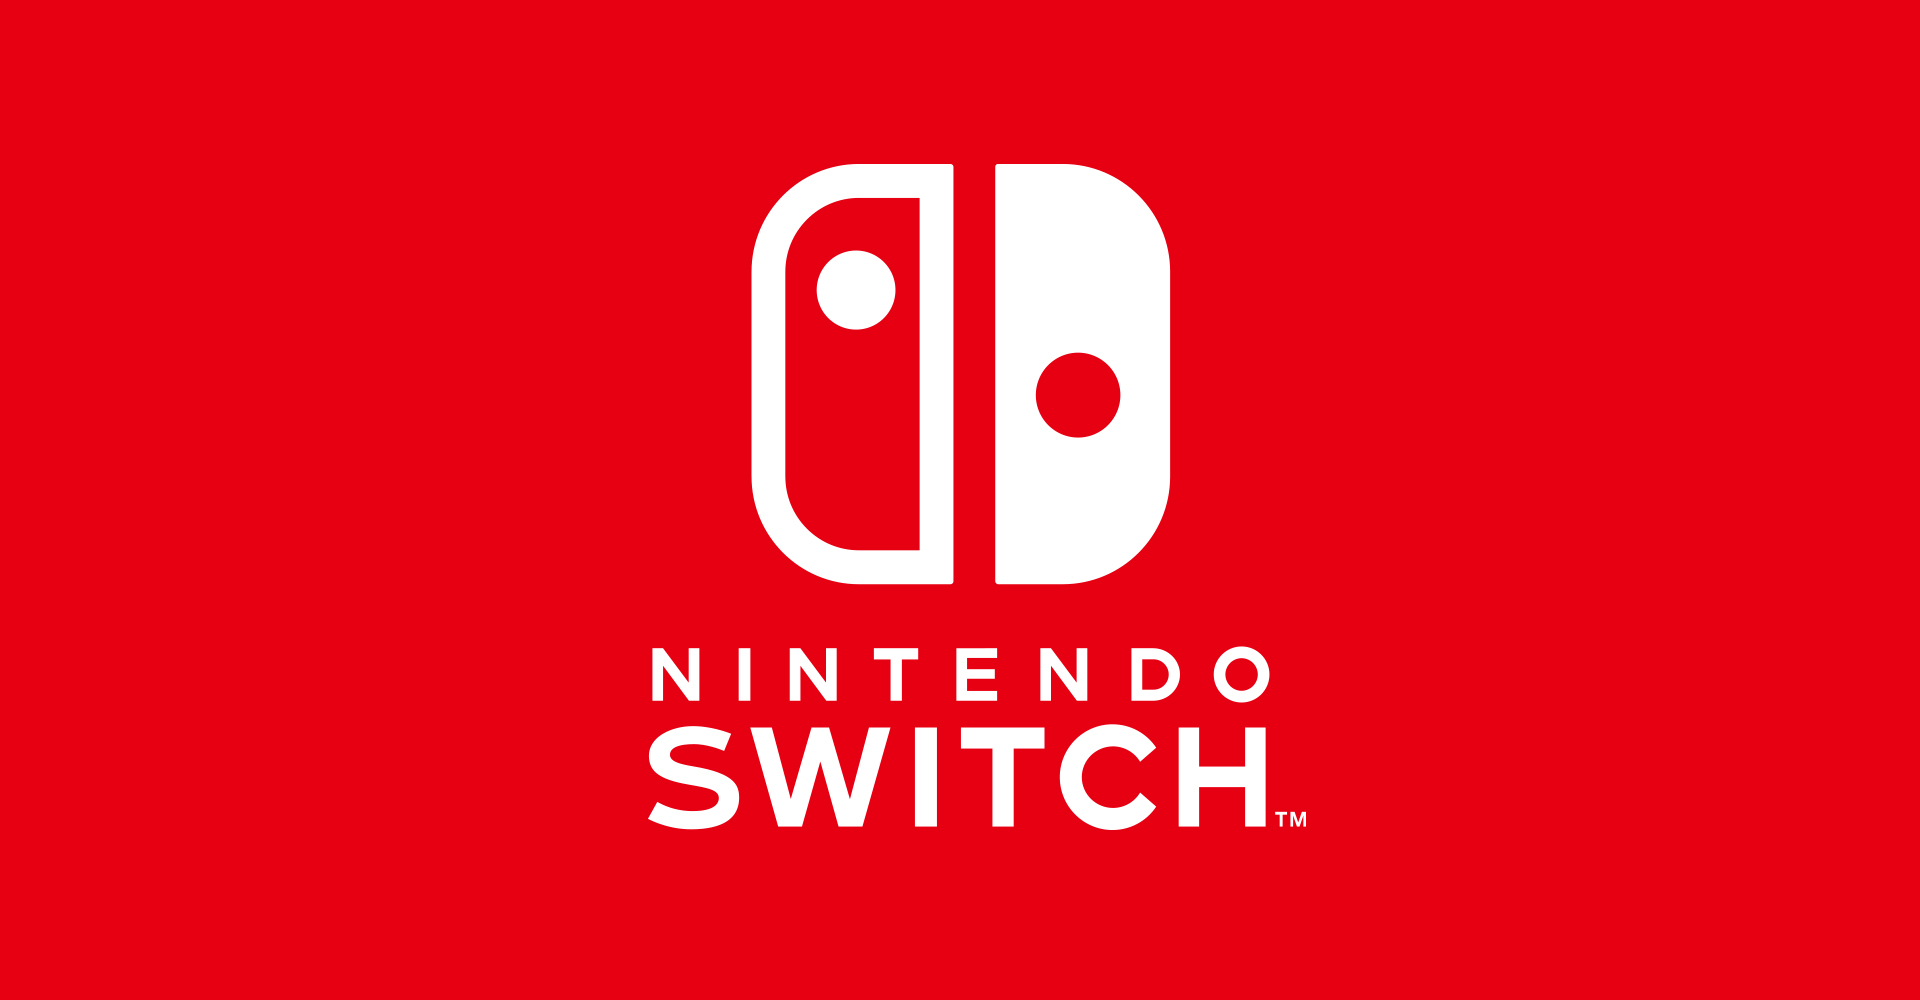 How to get 12 months of free Nintendo Switch Online with ... - 1920 x 1000 jpeg 115kB